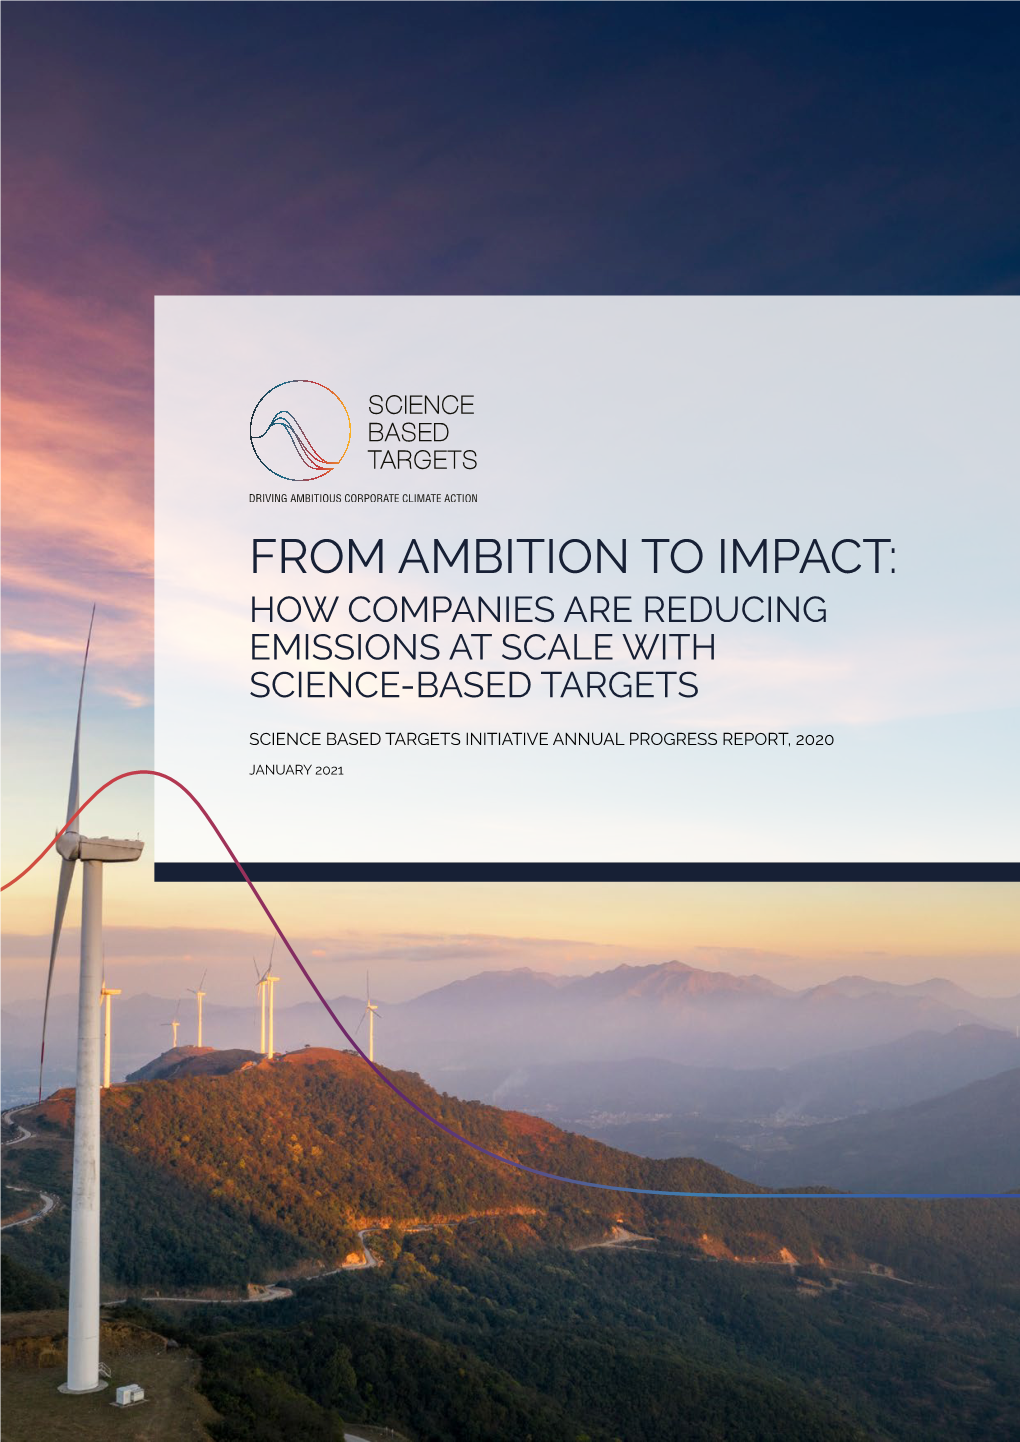 From Ambition to Impact: How Companies Are Reducing Emissions at Scale with Science-Based Targets